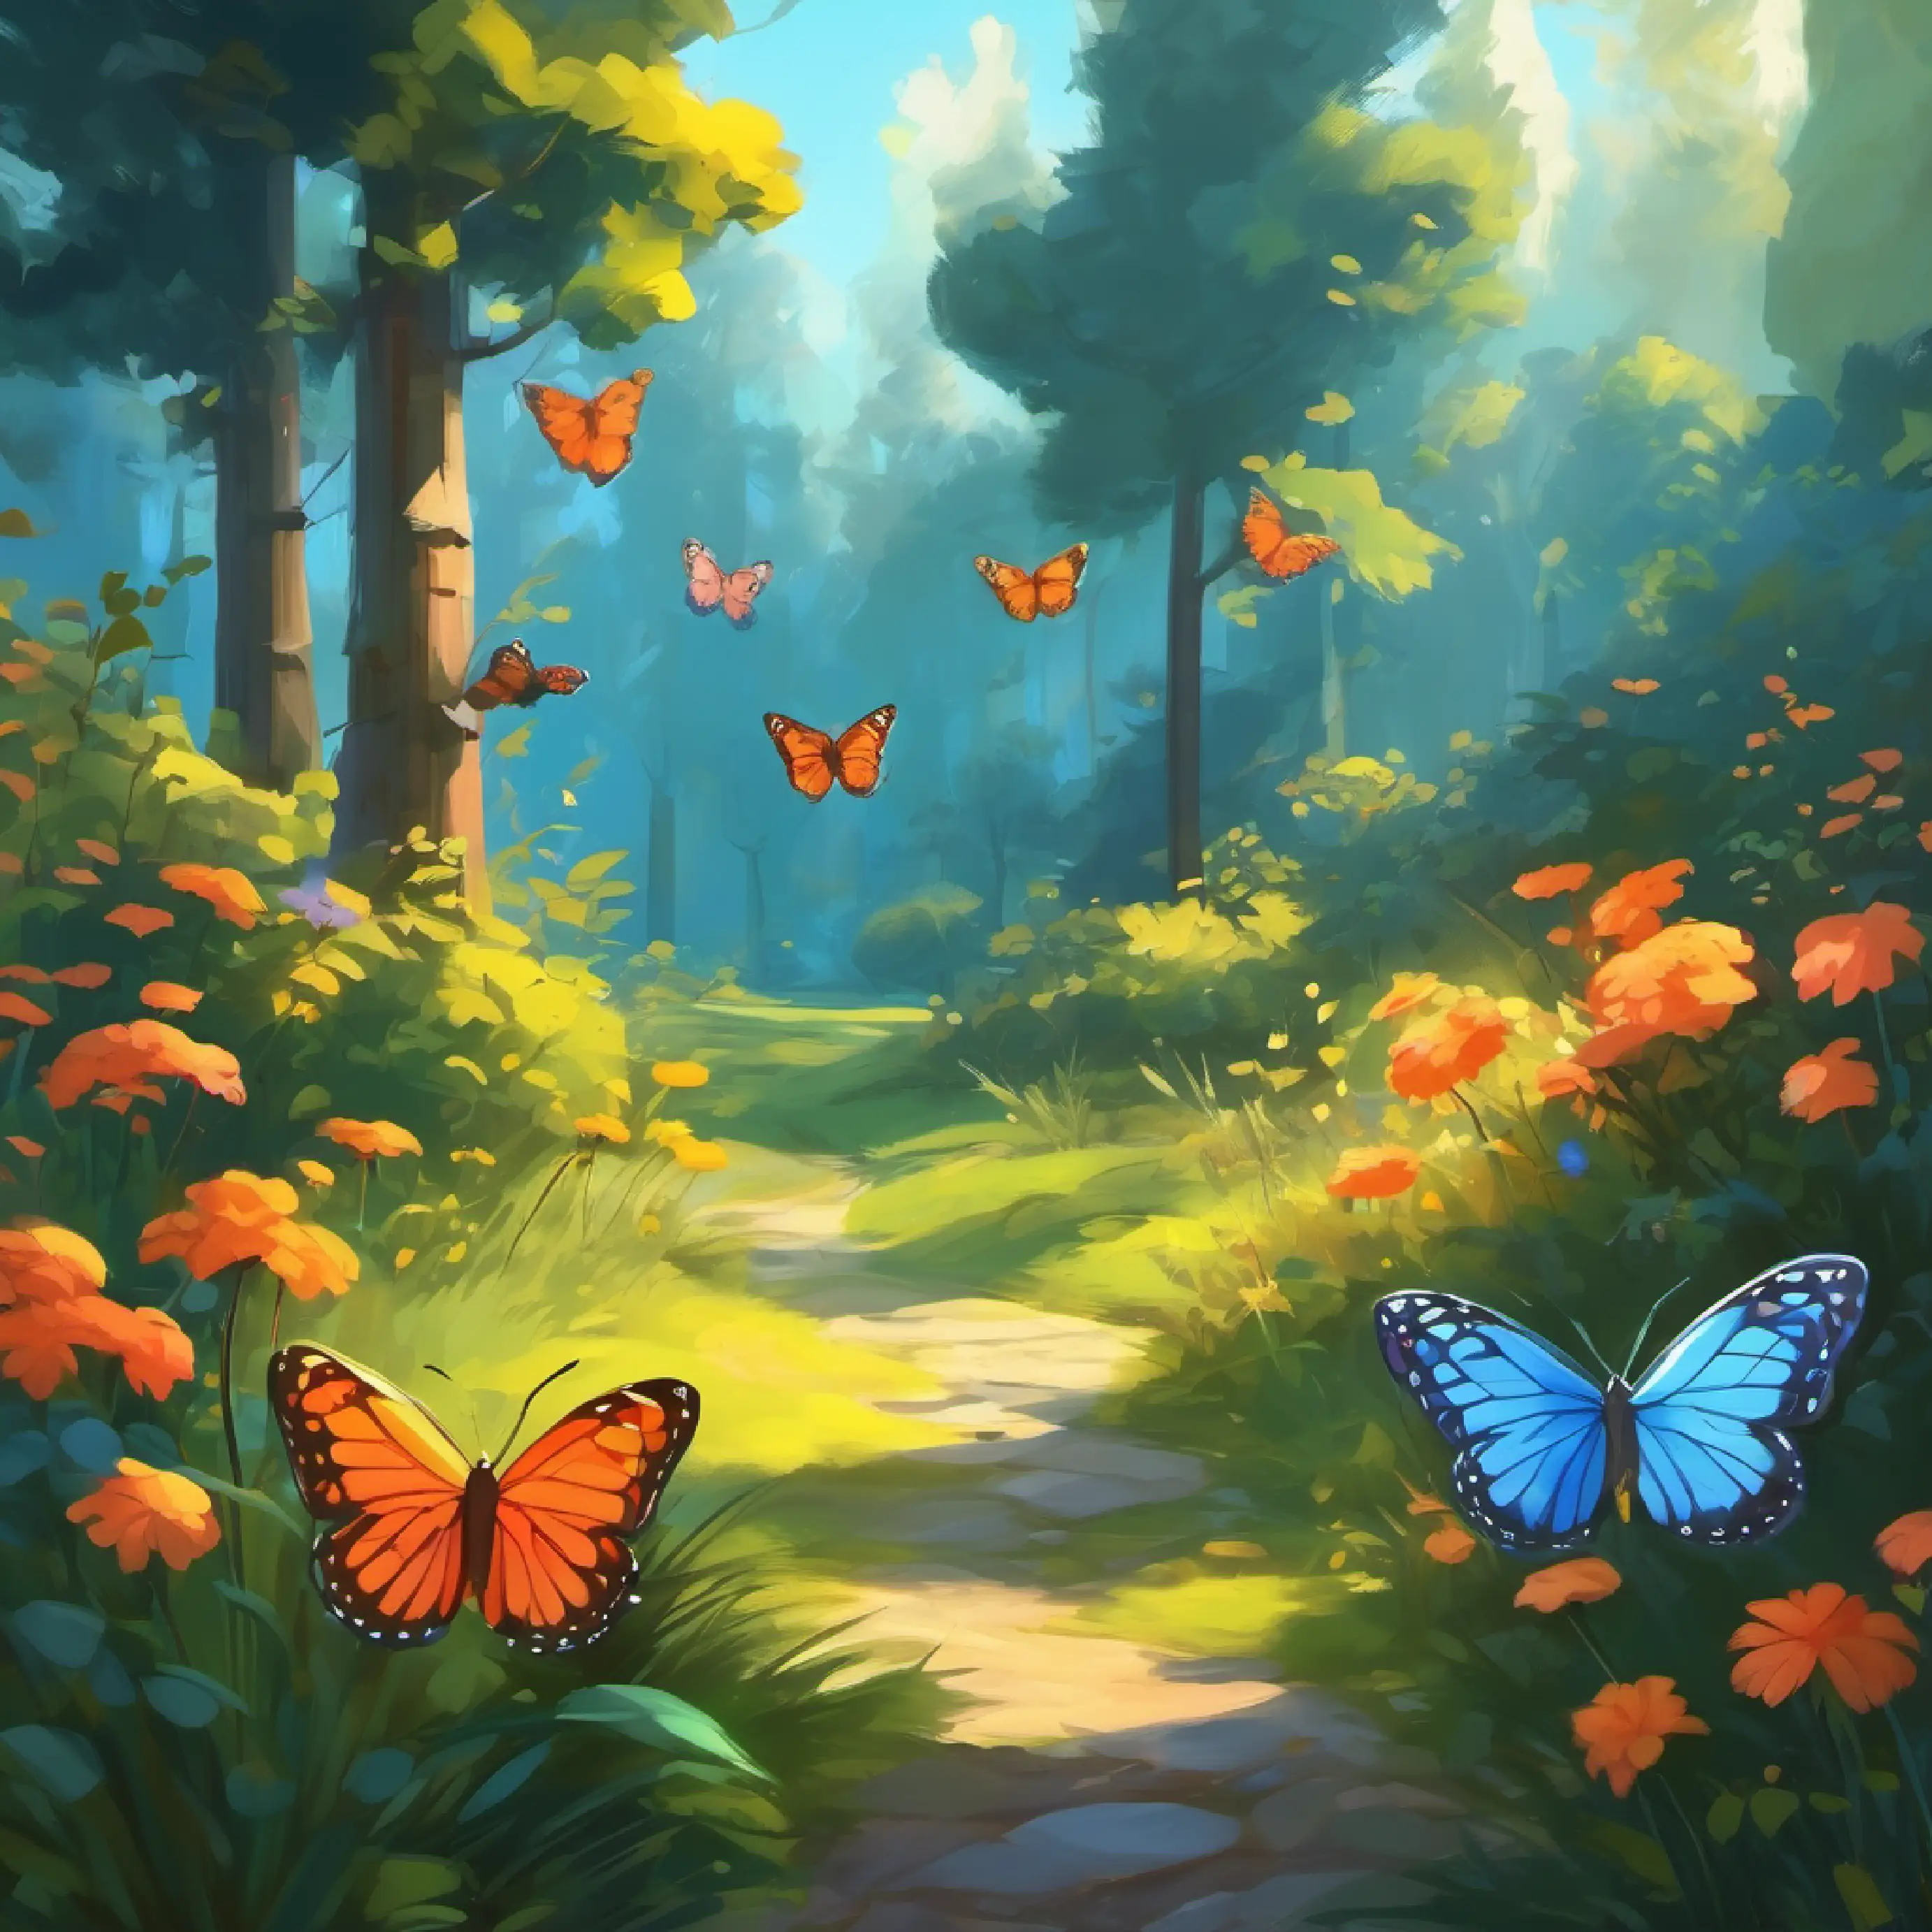 Play a game and find five butterflies.